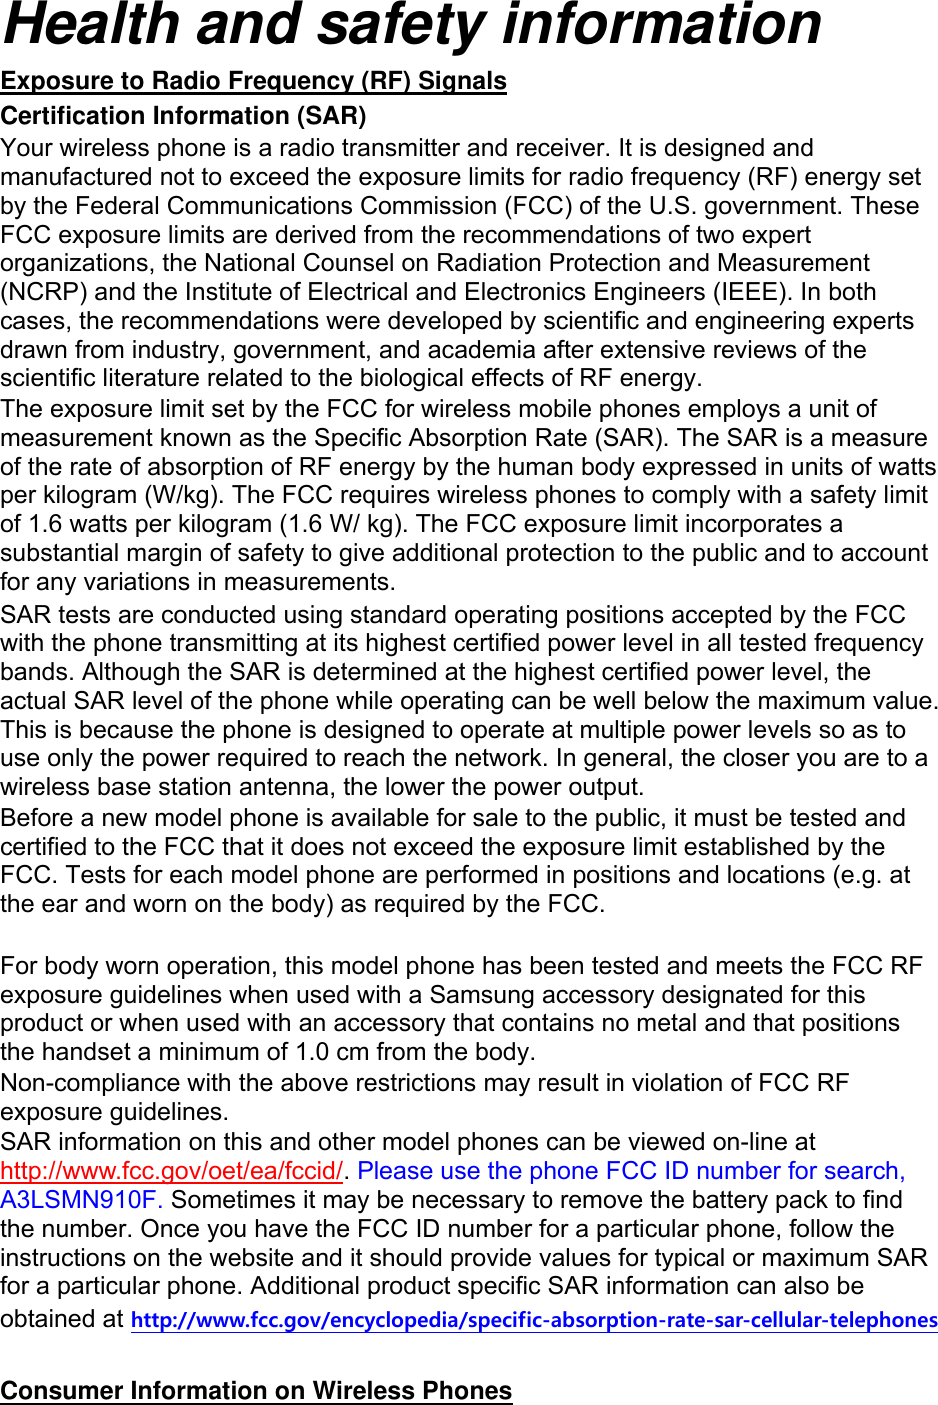 Health and safety information Exposure to Radio Frequency (RF) Signals Certification Information (SAR) Your wireless phone is a radio transmitter and receiver. It is designed and manufactured not to exceed the exposure limits for radio frequency (RF) energy set by the Federal Communications Commission (FCC) of the U.S. government. These FCC exposure limits are derived from the recommendations of two expert organizations, the National Counsel on Radiation Protection and Measurement (NCRP) and the Institute of Electrical and Electronics Engineers (IEEE). In both cases, the recommendations were developed by scientific and engineering experts drawn from industry, government, and academia after extensive reviews of the scientific literature related to the biological effects of RF energy. The exposure limit set by the FCC for wireless mobile phones employs a unit of measurement known as the Specific Absorption Rate (SAR). The SAR is a measure of the rate of absorption of RF energy by the human body expressed in units of watts per kilogram (W/kg). The FCC requires wireless phones to comply with a safety limit of 1.6 watts per kilogram (1.6 W/ kg). The FCC exposure limit incorporates a substantial margin of safety to give additional protection to the public and to account for any variations in measurements. SAR tests are conducted using standard operating positions accepted by the FCC with the phone transmitting at its highest certified power level in all tested frequency bands. Although the SAR is determined at the highest certified power level, the actual SAR level of the phone while operating can be well below the maximum value. This is because the phone is designed to operate at multiple power levels so as to use only the power required to reach the network. In general, the closer you are to a wireless base station antenna, the lower the power output. Before a new model phone is available for sale to the public, it must be tested and certified to the FCC that it does not exceed the exposure limit established by the FCC. Tests for each model phone are performed in positions and locations (e.g. at the ear and worn on the body) as required by the FCC.      For body worn operation, this model phone has been tested and meets the FCC RF exposure guidelines when used with a Samsung accessory designated for this product or when used with an accessory that contains no metal and that positions the handset a minimum of 1.0 cm from the body.   Non-compliance with the above restrictions may result in violation of FCC RF exposure guidelines. SAR information on this and other model phones can be viewed on-line at http://www.fcc.gov/oet/ea/fccid/. Please use the phone FCC ID number for search, A3LSMN910F. Sometimes it may be necessary to remove the battery pack to find the number. Once you have the FCC ID number for a particular phone, follow the instructions on the website and it should provide values for typical or maximum SAR for a particular phone. Additional product specific SAR information can also be obtained at http://www.fcc.gov/encyclopedia/specific-absorption-rate-sar-cellular-telephones  Consumer Information on Wireless Phones 